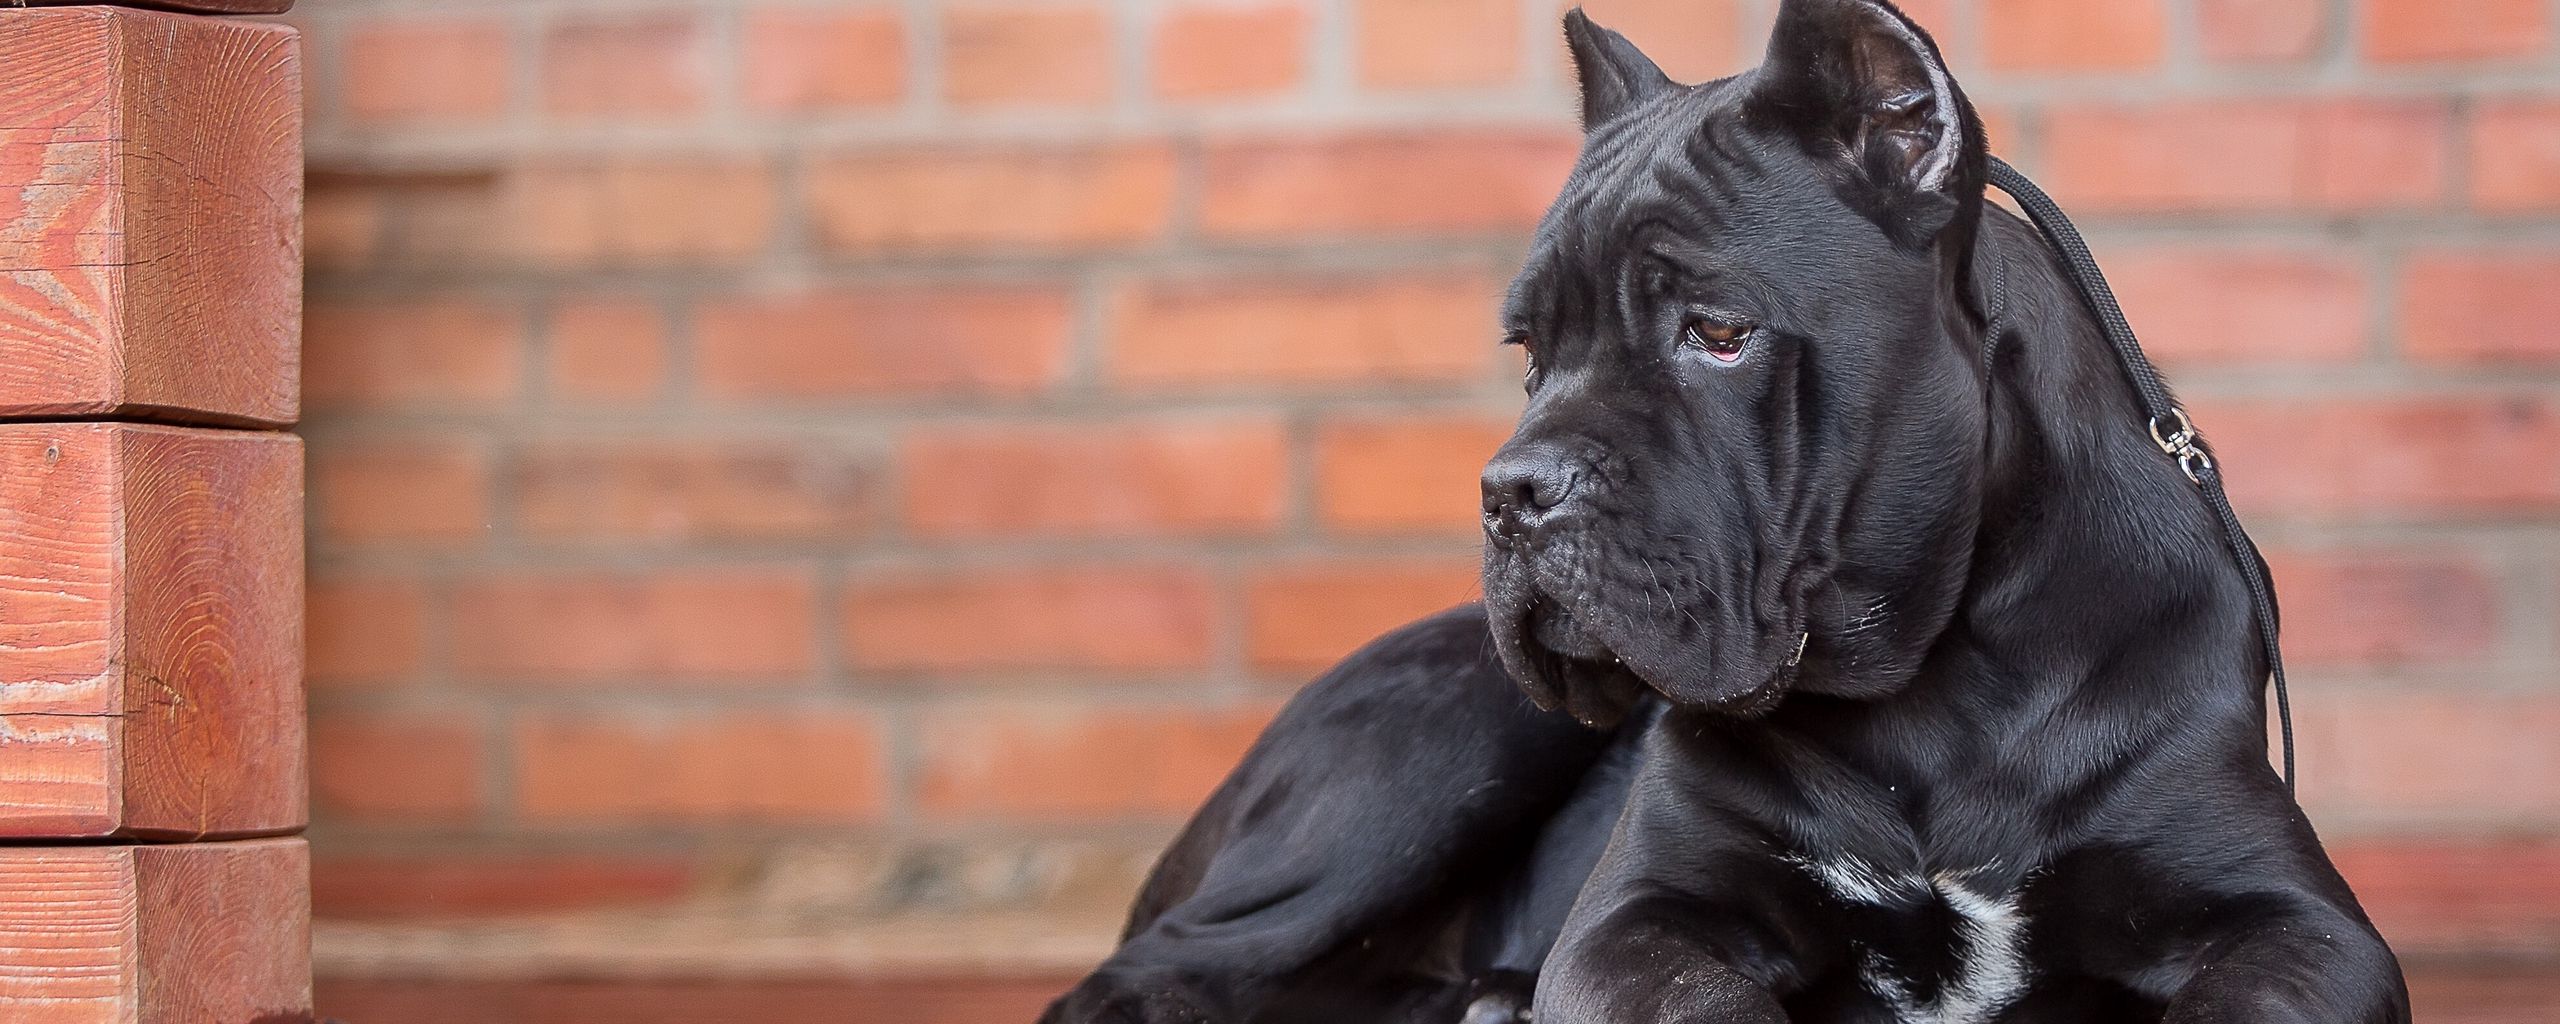 799741 4K 5K 6K Dogs Cane Corso Black Snout 1ZOOM  Rare Gallery HD  Wallpapers